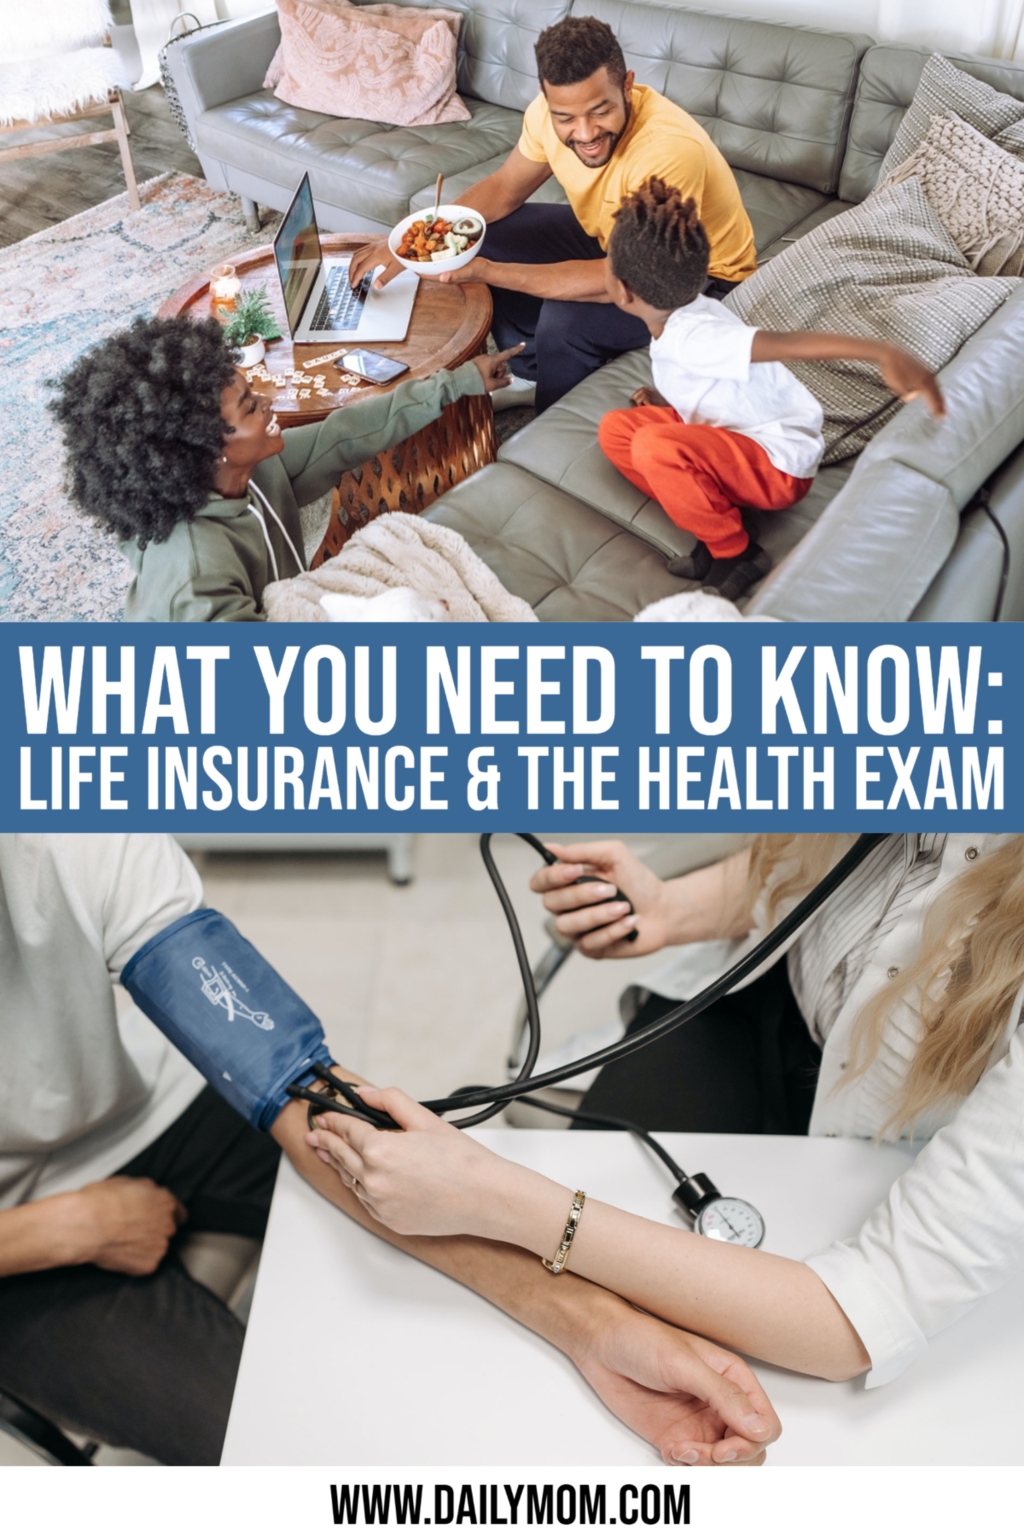 Life Insurance: What You Need To Know About The Health Exam To Get The Best Life Insurance